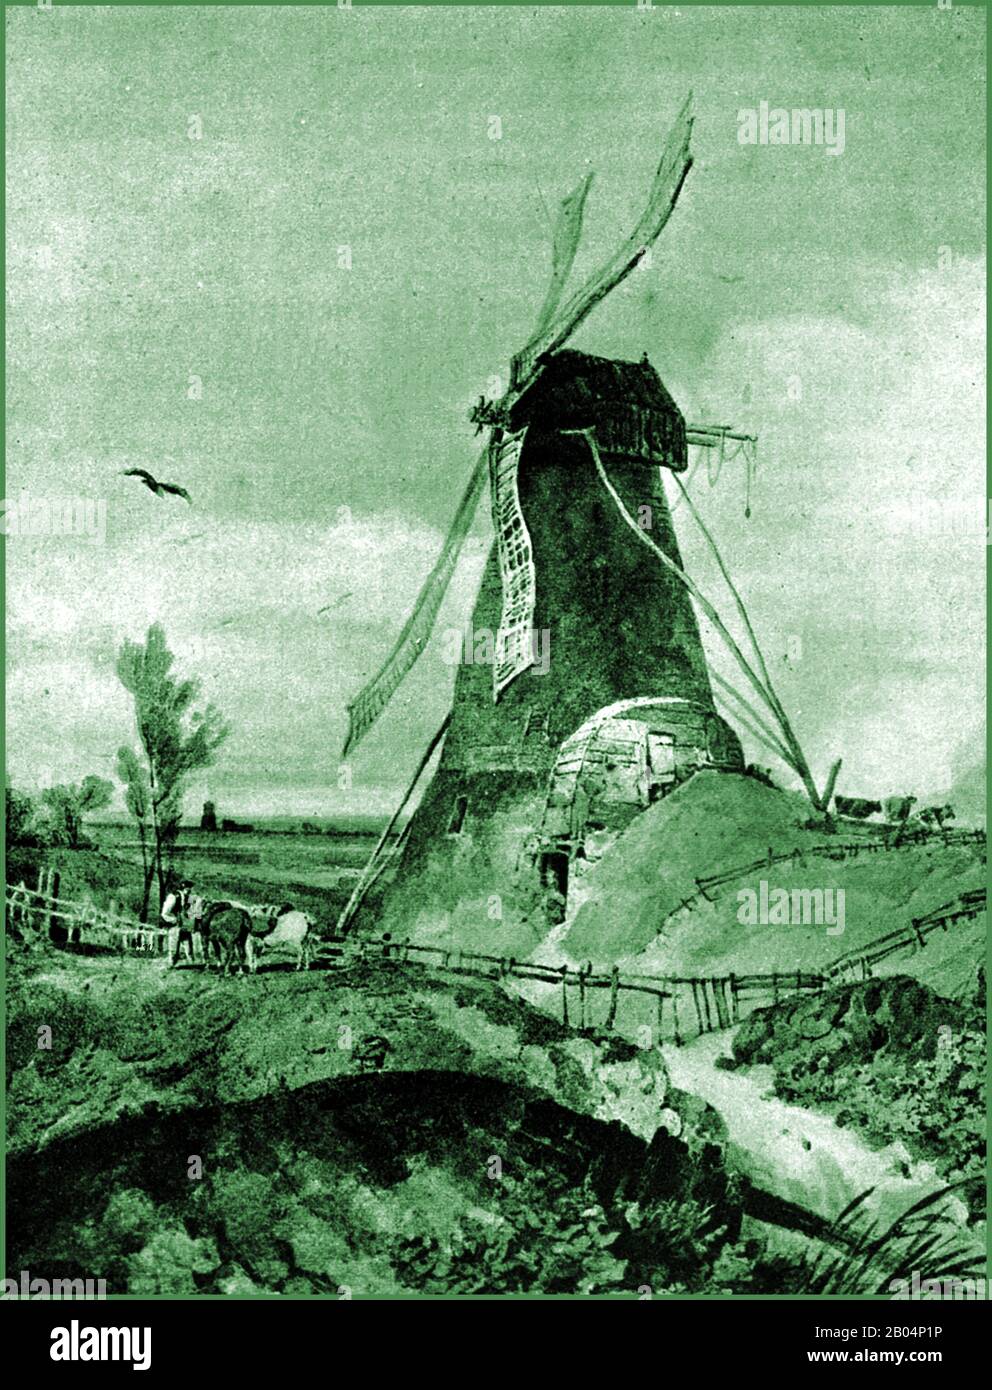 An historic painting of a former  old boot-shaped four sail windmill in Lincolnshire, England, said to have  been operated by a woman miller  and claimed  by some to have inspired the 'Old Woman who lived in a shoe' nursery rhyme that was first published in 1794. (Roud Folk Song Index  19132) Stock Photo